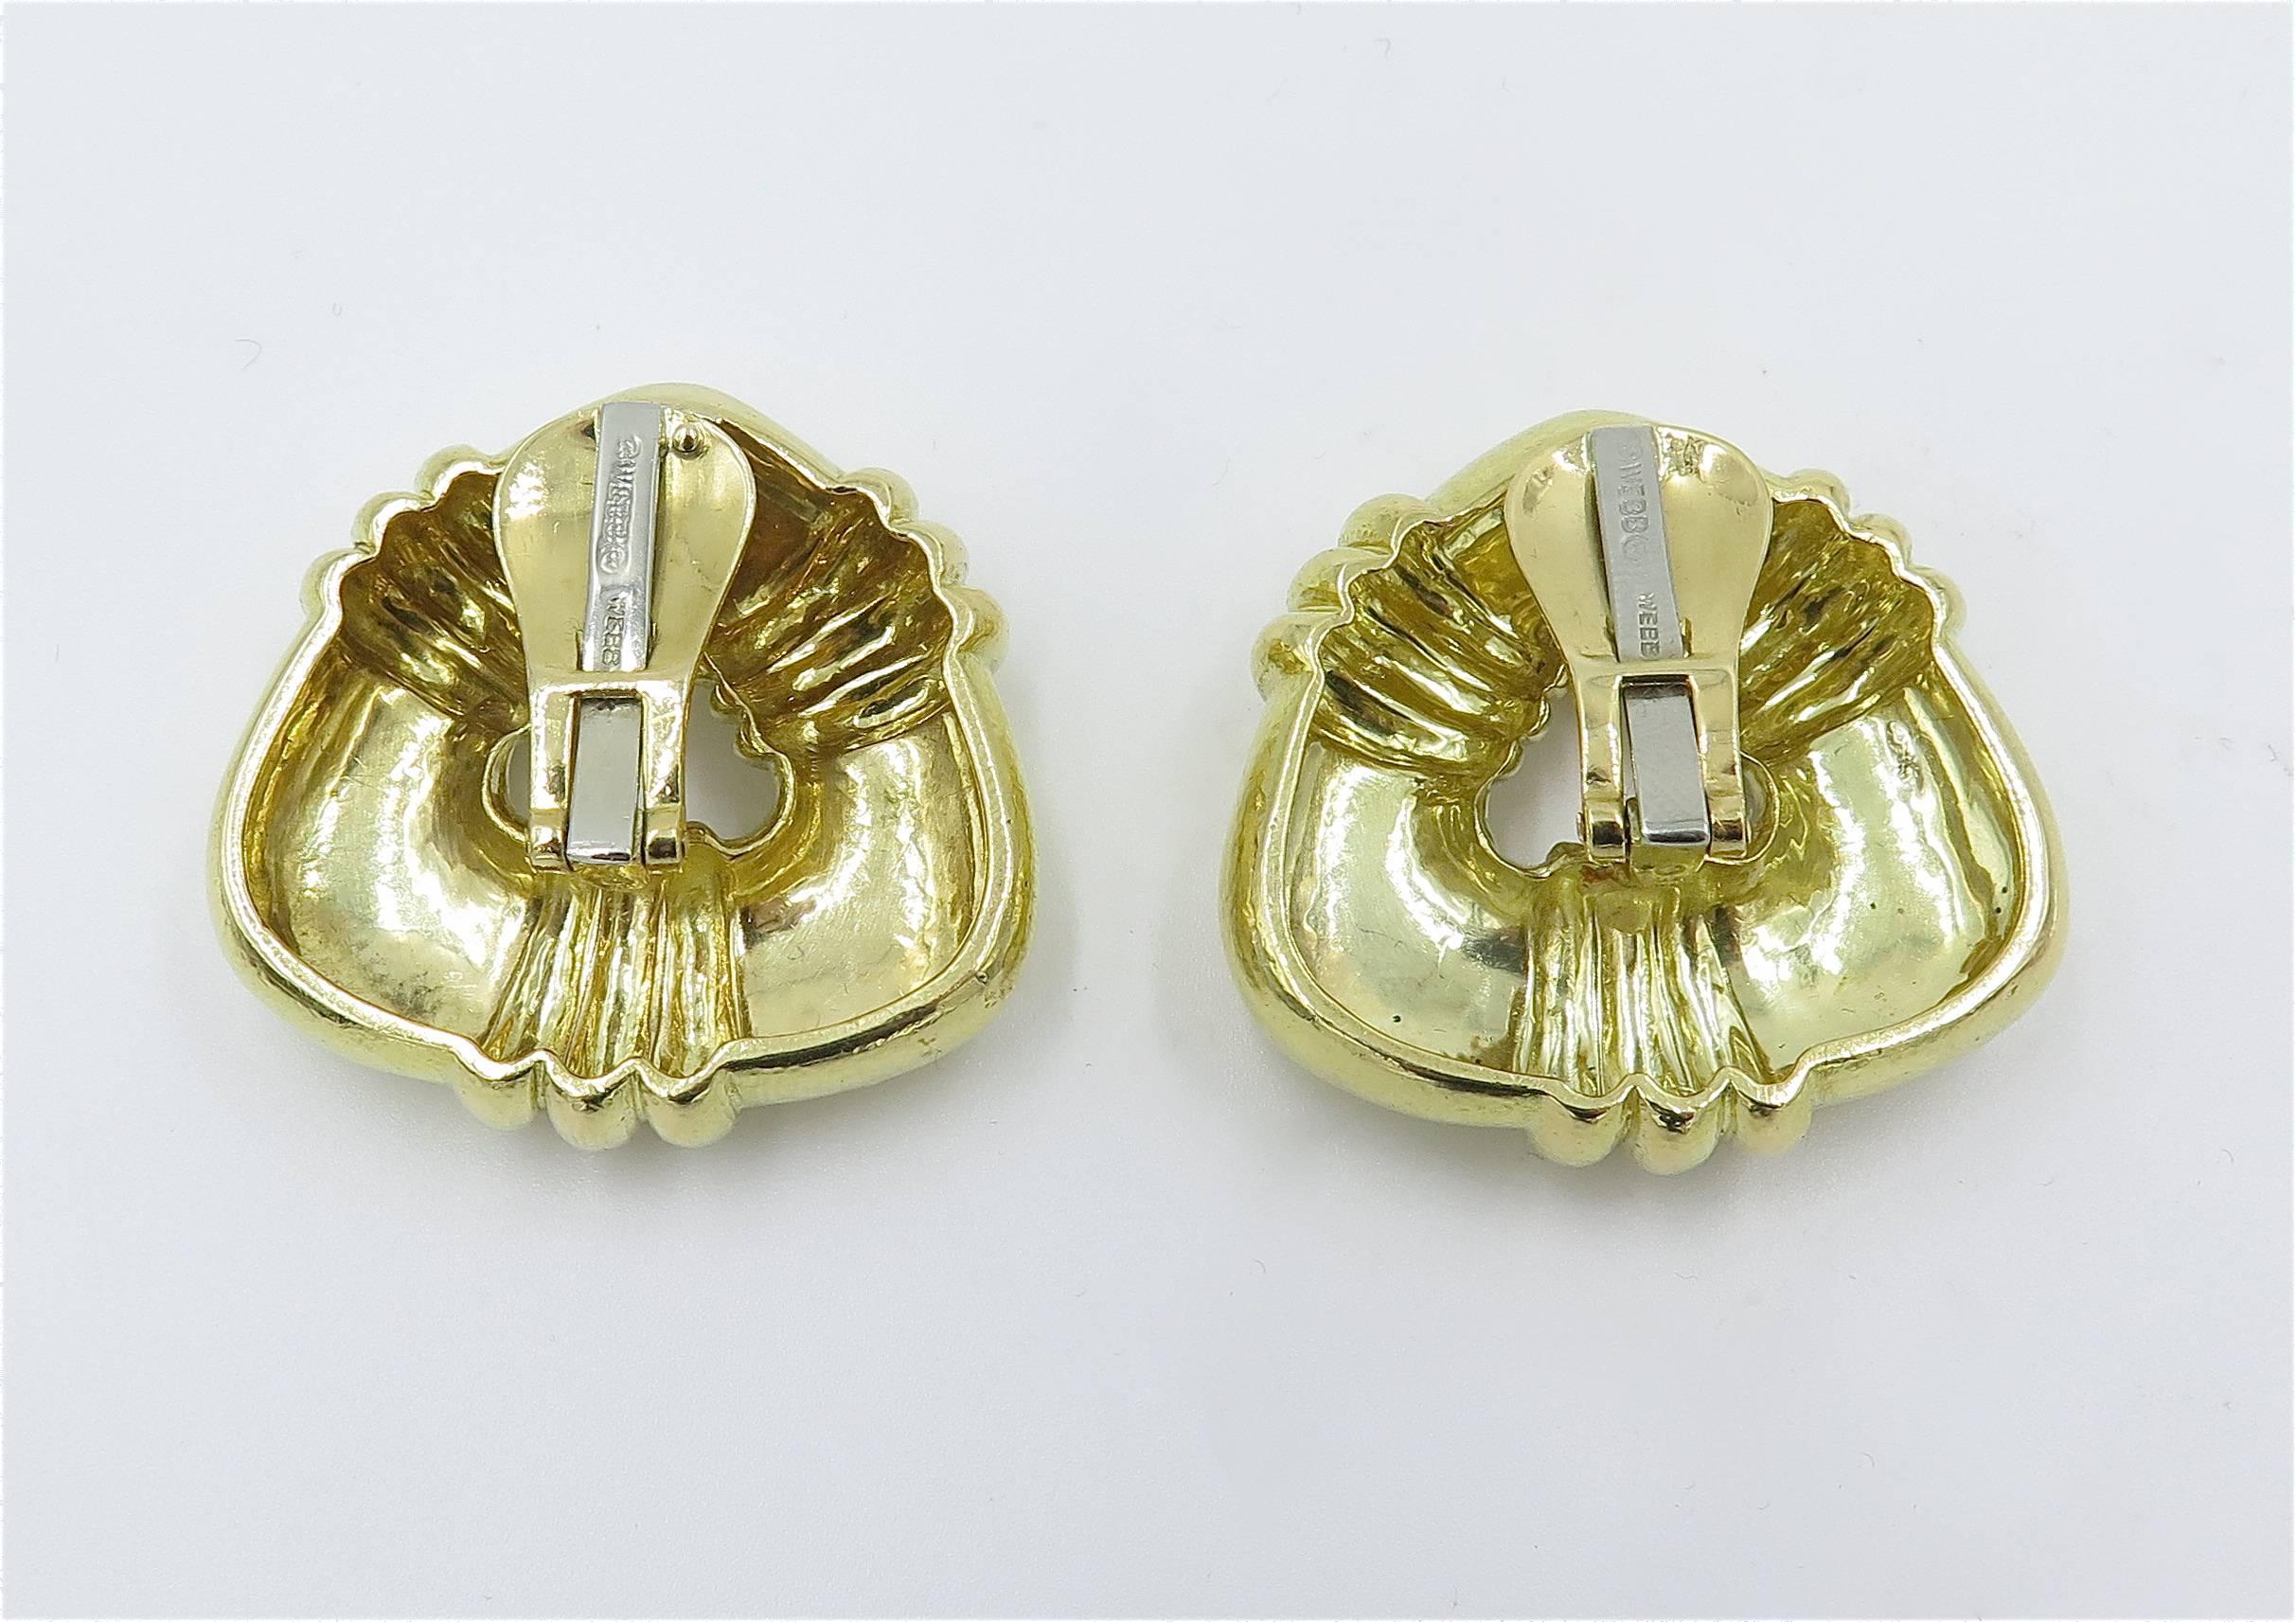 A pair of 18 karat yellow gold hand hammered triangular shaped earrings, David Webb, Circa 1970s.  Signed © Webb ® Webb 18K.  The earrings are each set with 3 fluted sections, one on each side.  The earrings have a gross weight of approximately 36.6